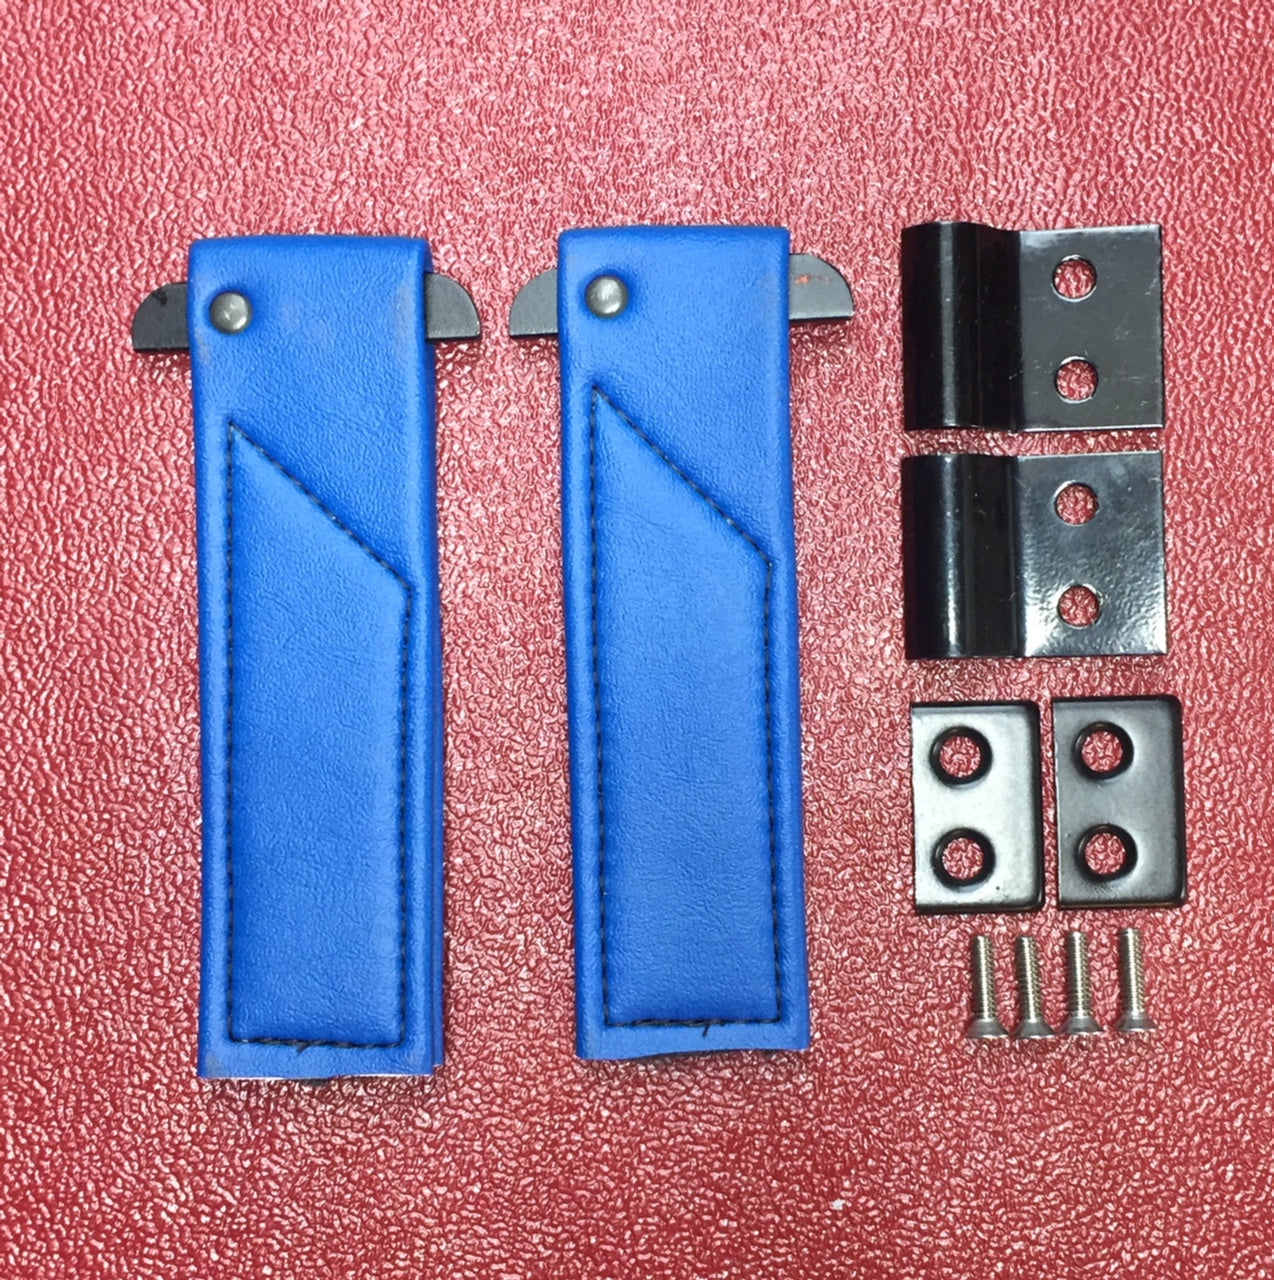 Austin Healey Sprite Door check strap kit with hardware (sold as a pair) Interior - Bugeye